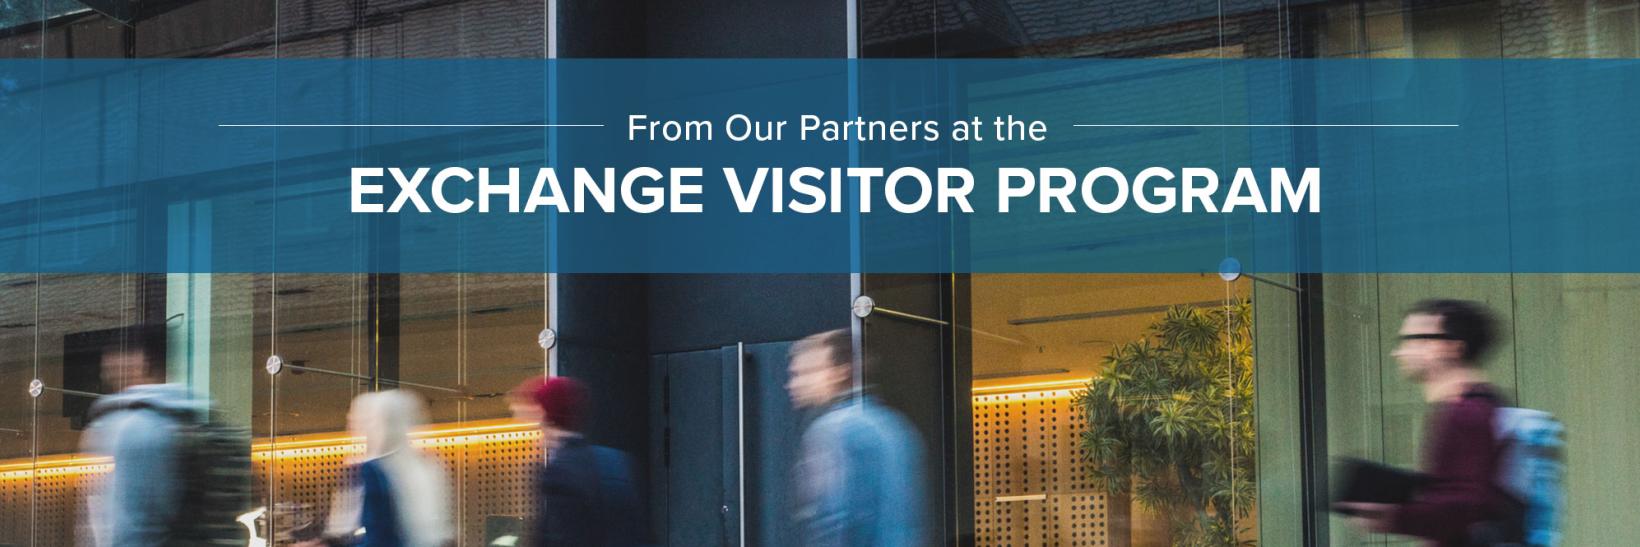 From our partners at the Exchange Visitor Program